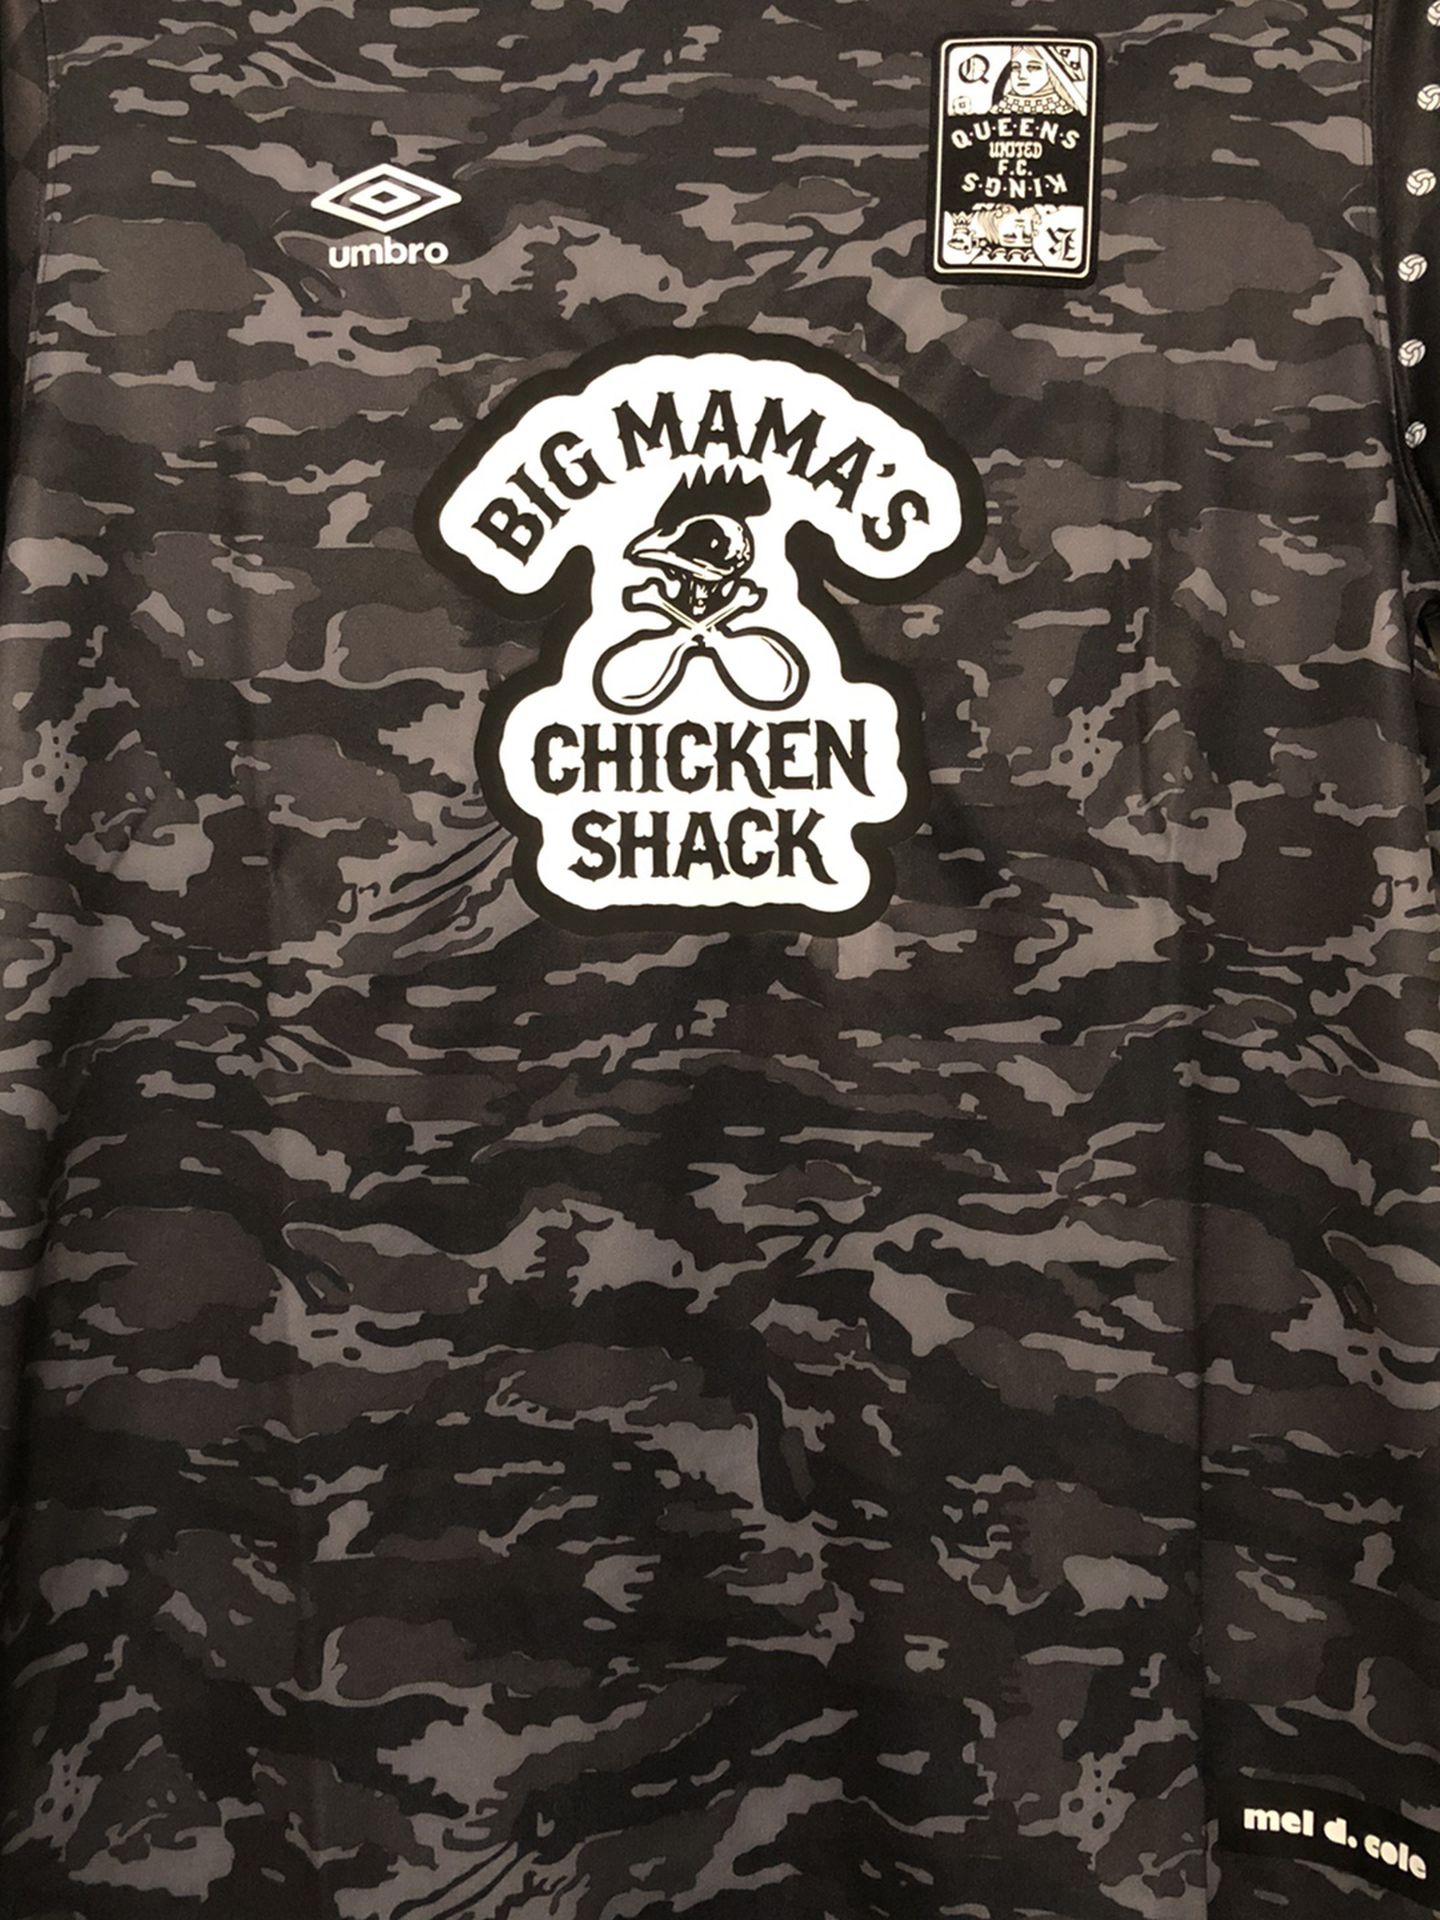 UMBRO Big Mama’s Chicken Shack Soccer Jersey ( Mel D’s Cole) Large Retail $ 100